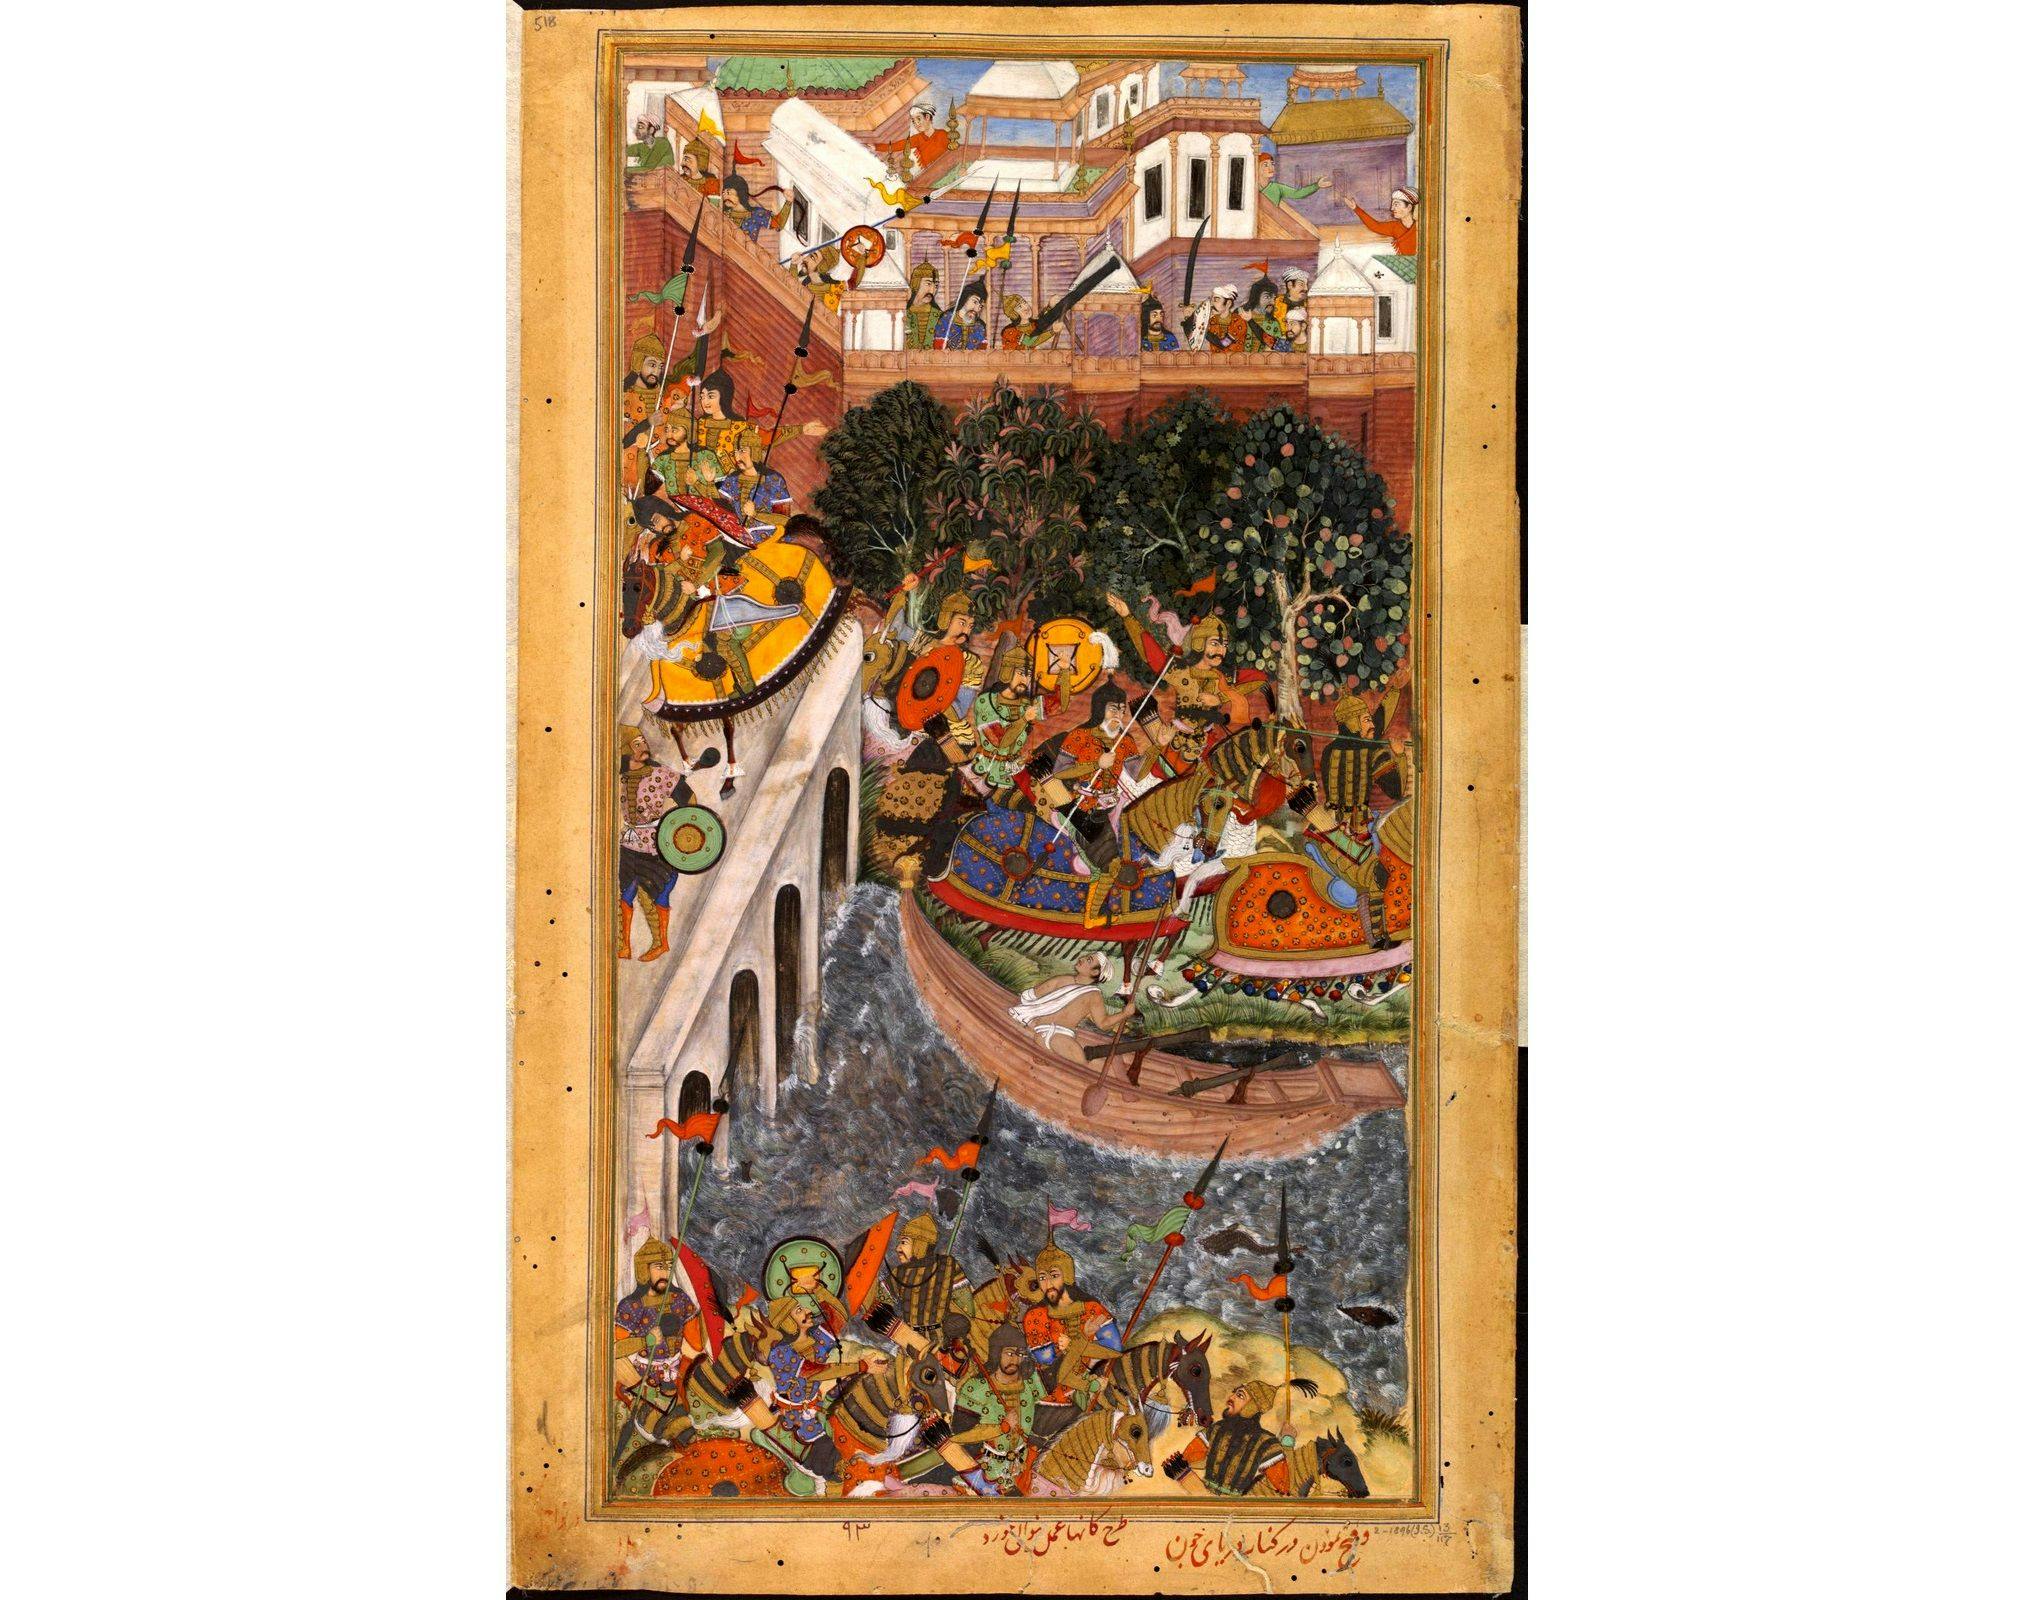 The Victory of Emperor Akbar over Ali Quli and Bahadur Khan at the Gomti River, Jaunpur, 1561 CE, painted by court artist Kanha in 1590-95 CE, from Akbarnama